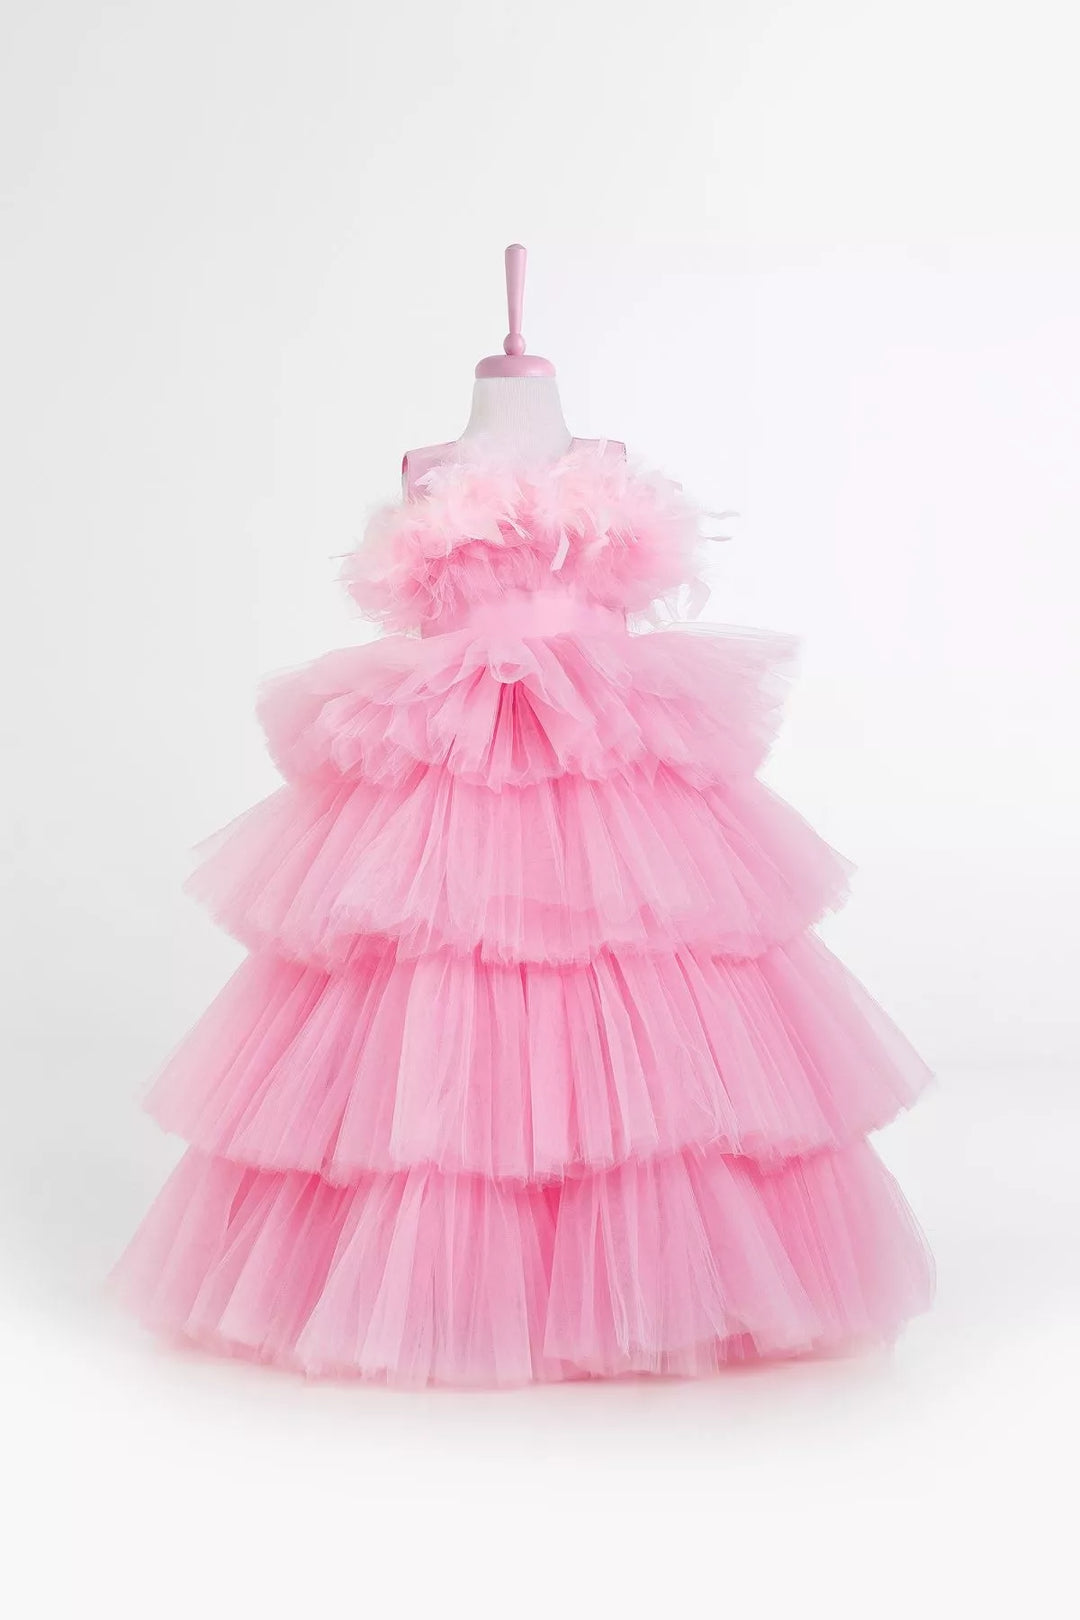 A sleeveless pink princess wedding dress. The dress has floor length skirt, satin top, and feathers on chest